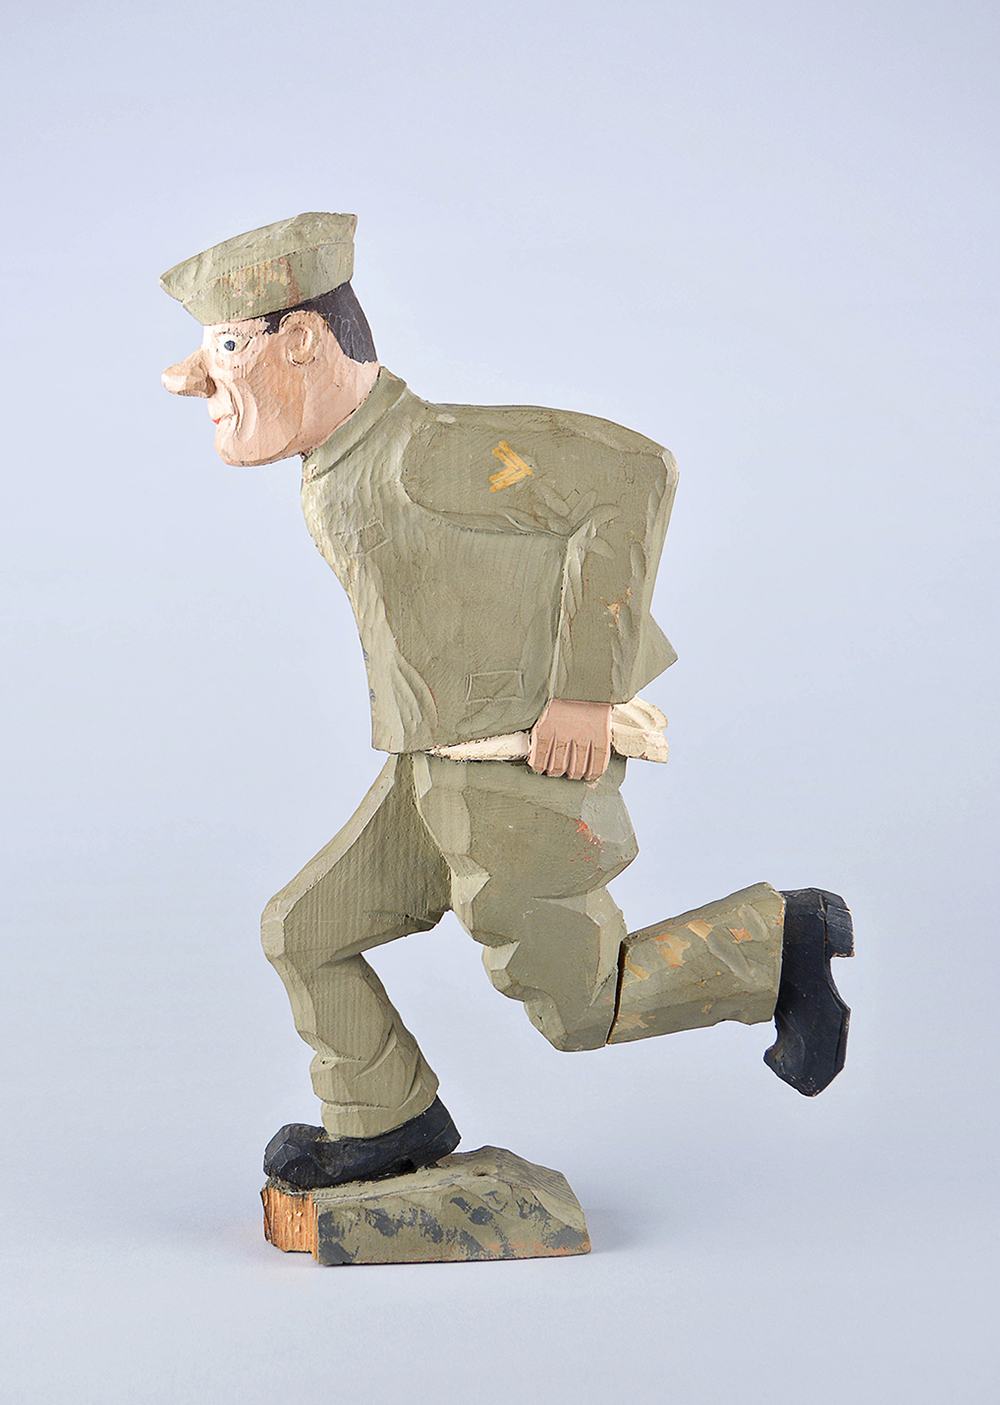 A rustic painted wooden carving of a soldier running. He has a green uniform and black shoes and his shirt is untucked.